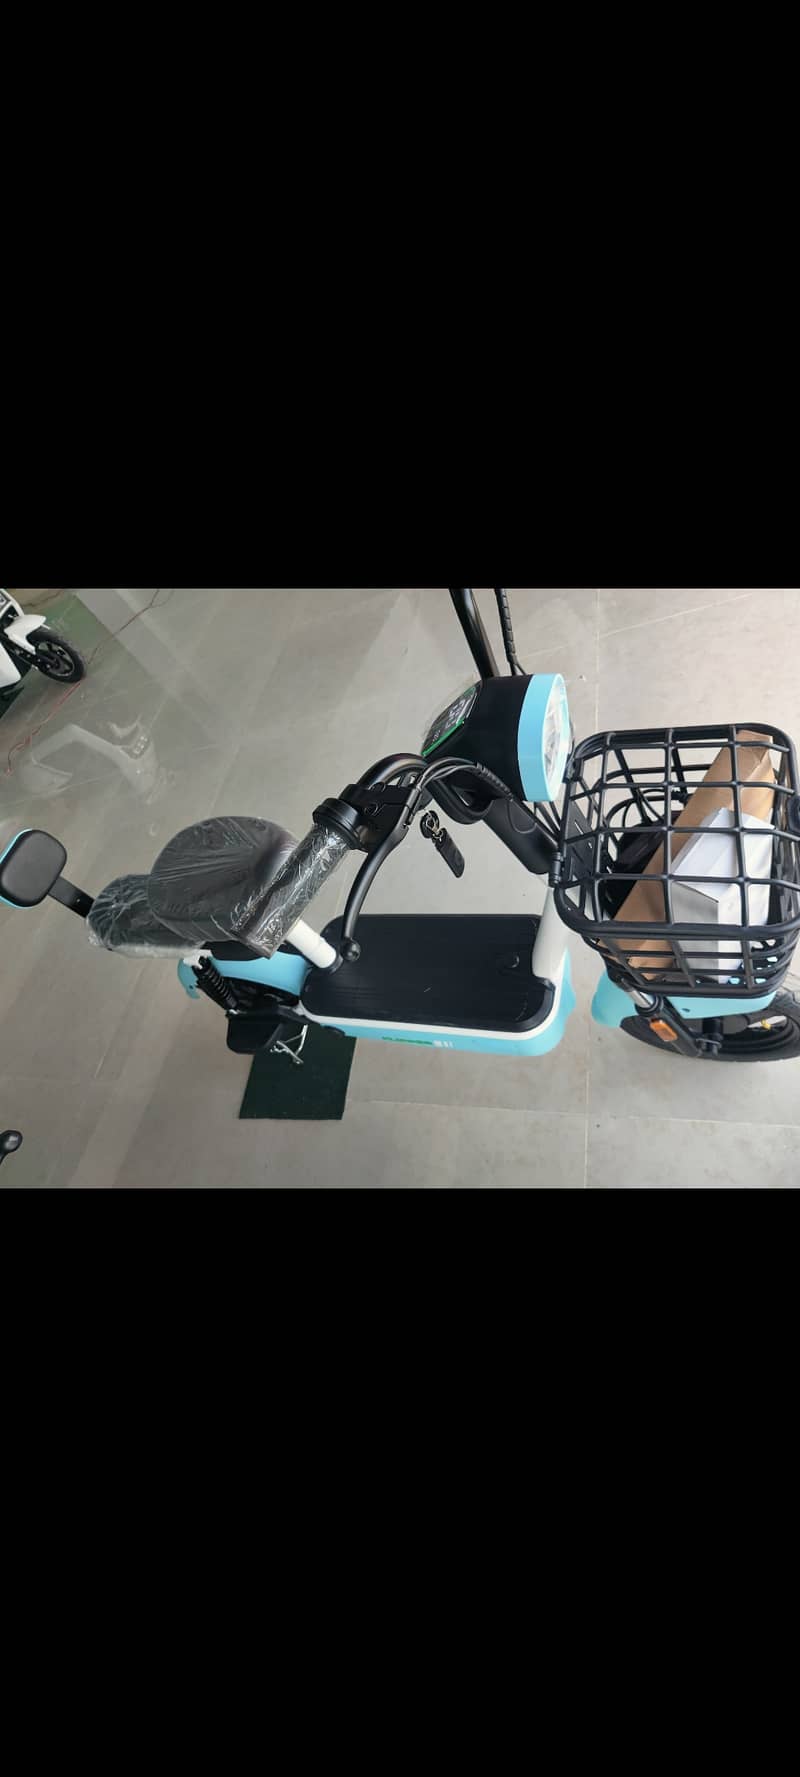 Electric Motercycle Scooters Evee 1